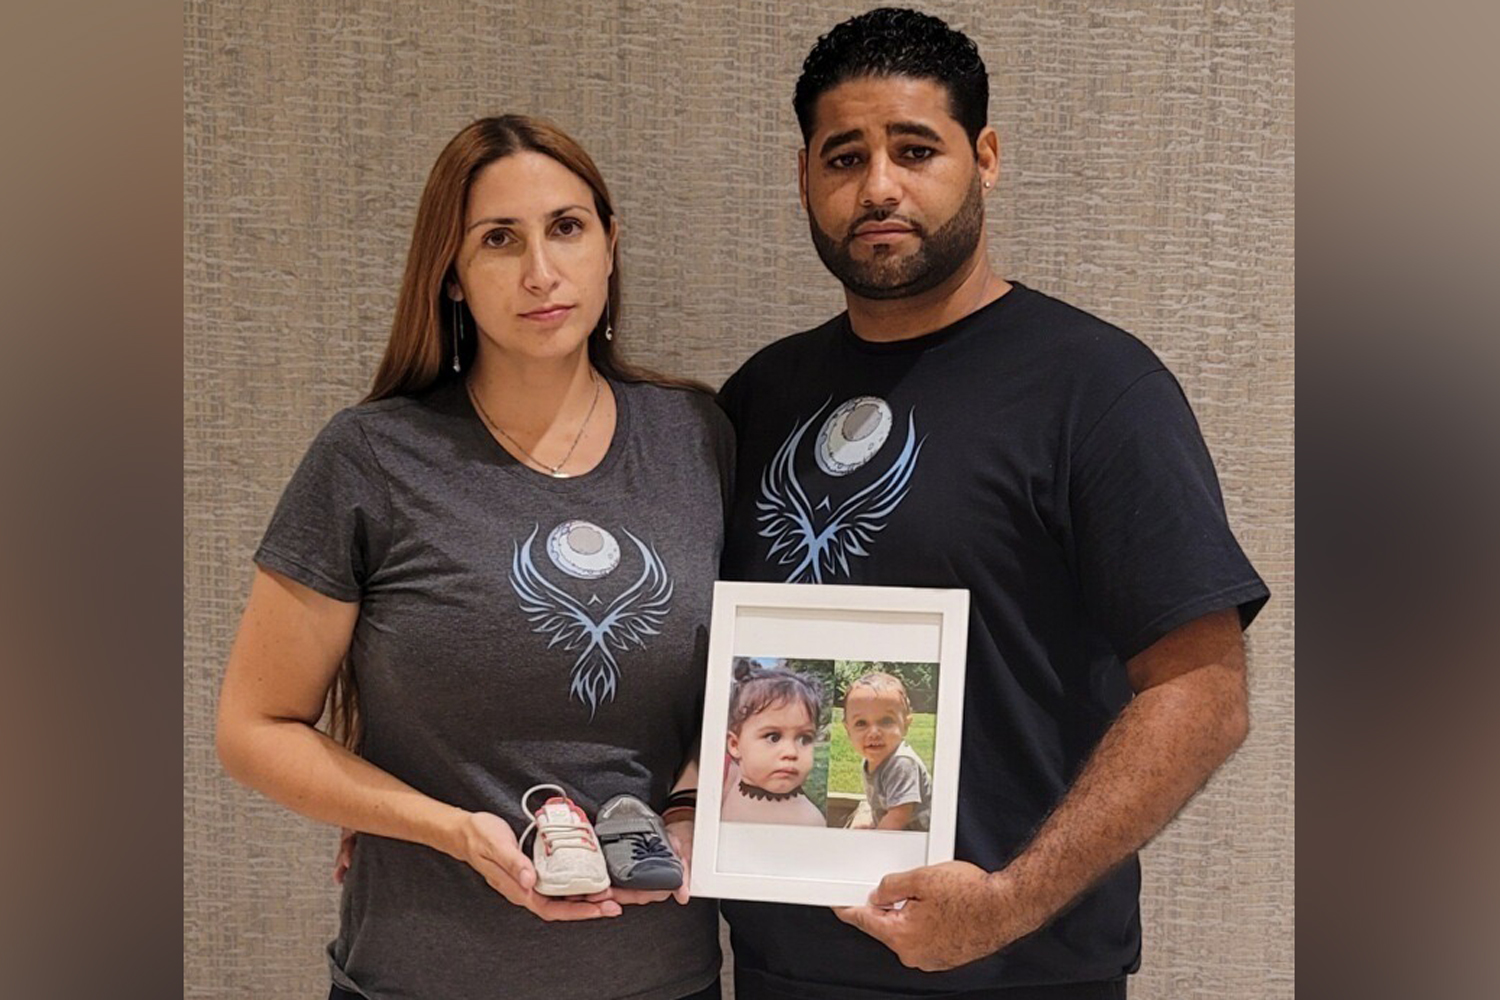 Marissa Quattrone-Rodriguez and Juan Rodriguez lost their twin babies, Luna and Phoenix, in a Bronx tragedy two years ago. Now they’re pushing Congress to require robust warning systems in automobiles.